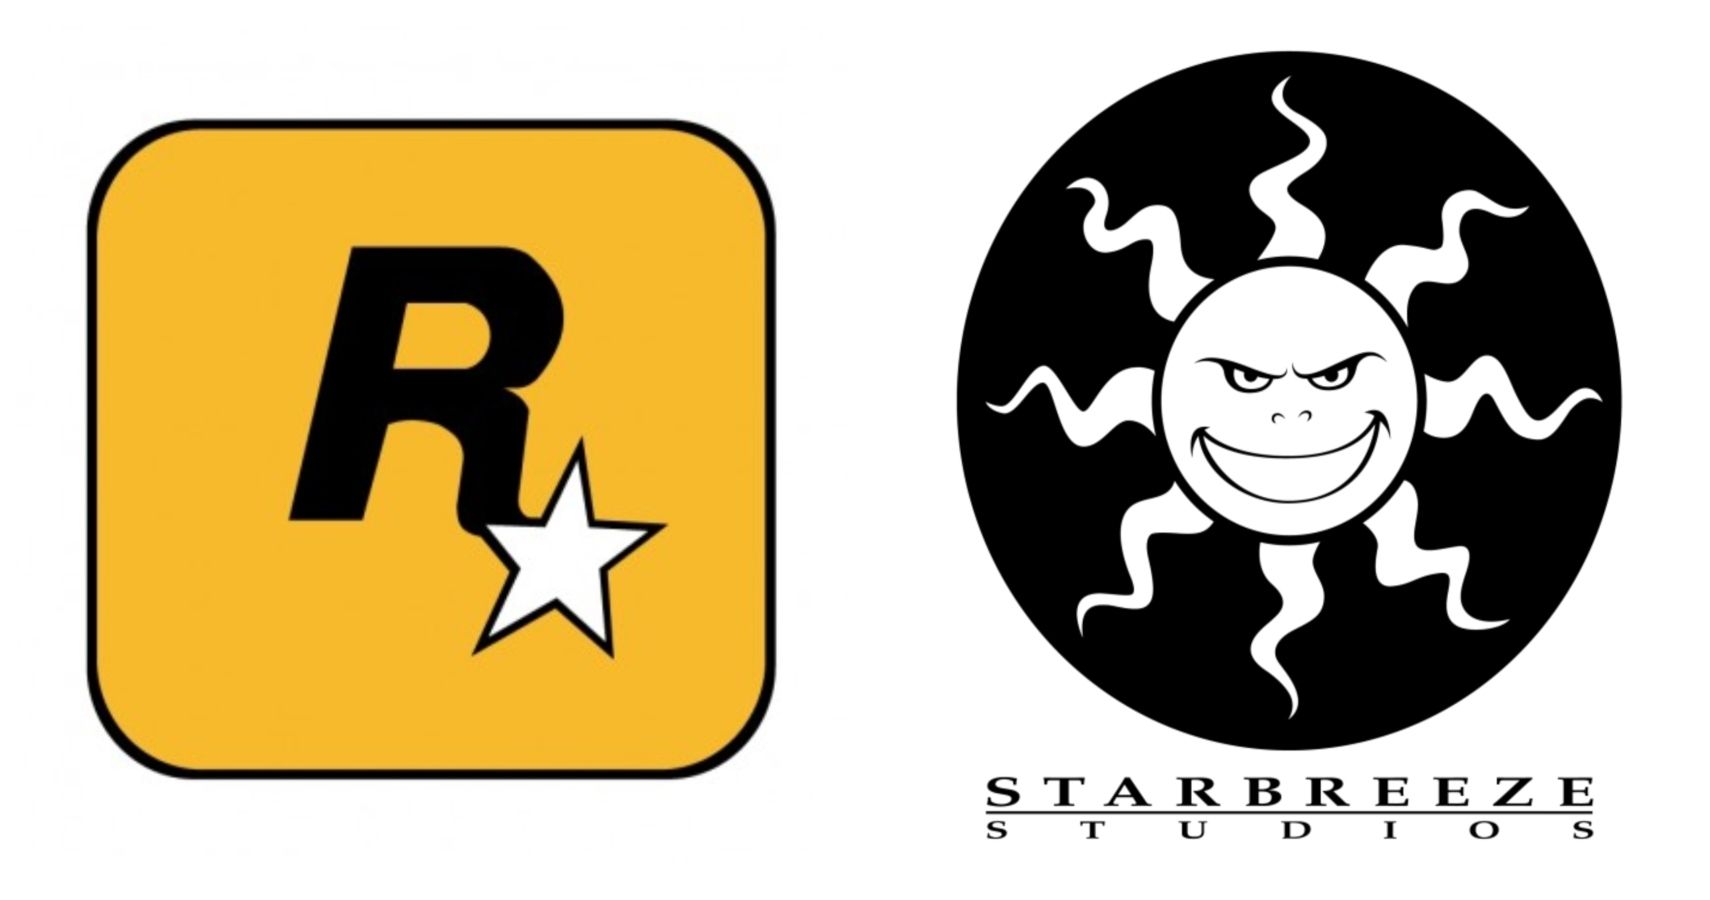 Rockstar Buys Studio From Struggling Payday Devs Amid Financial Woes